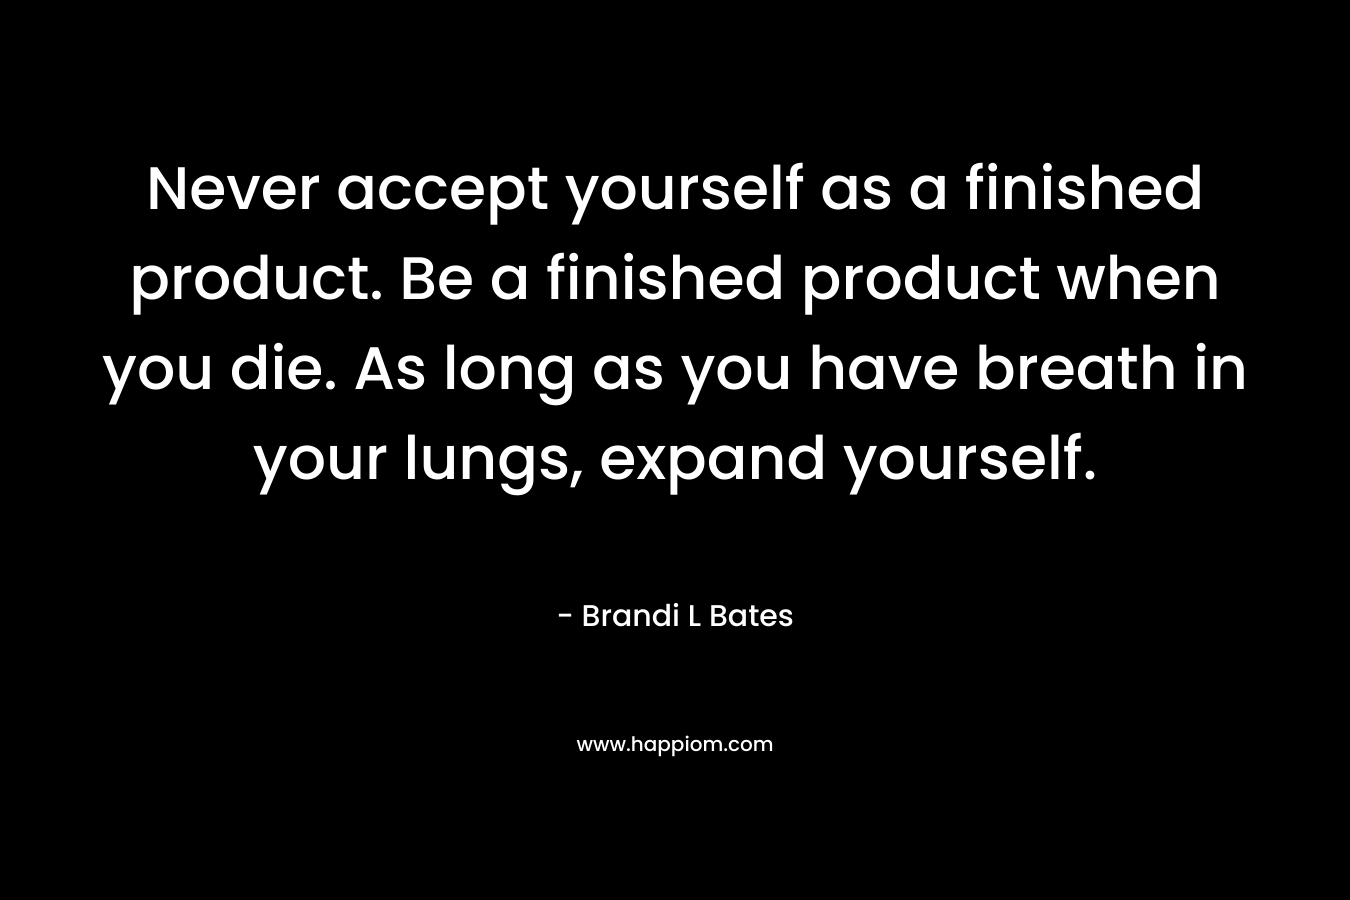 Never accept yourself as a finished product. Be a finished product when you die. As long as you have breath in your lungs, expand yourself.